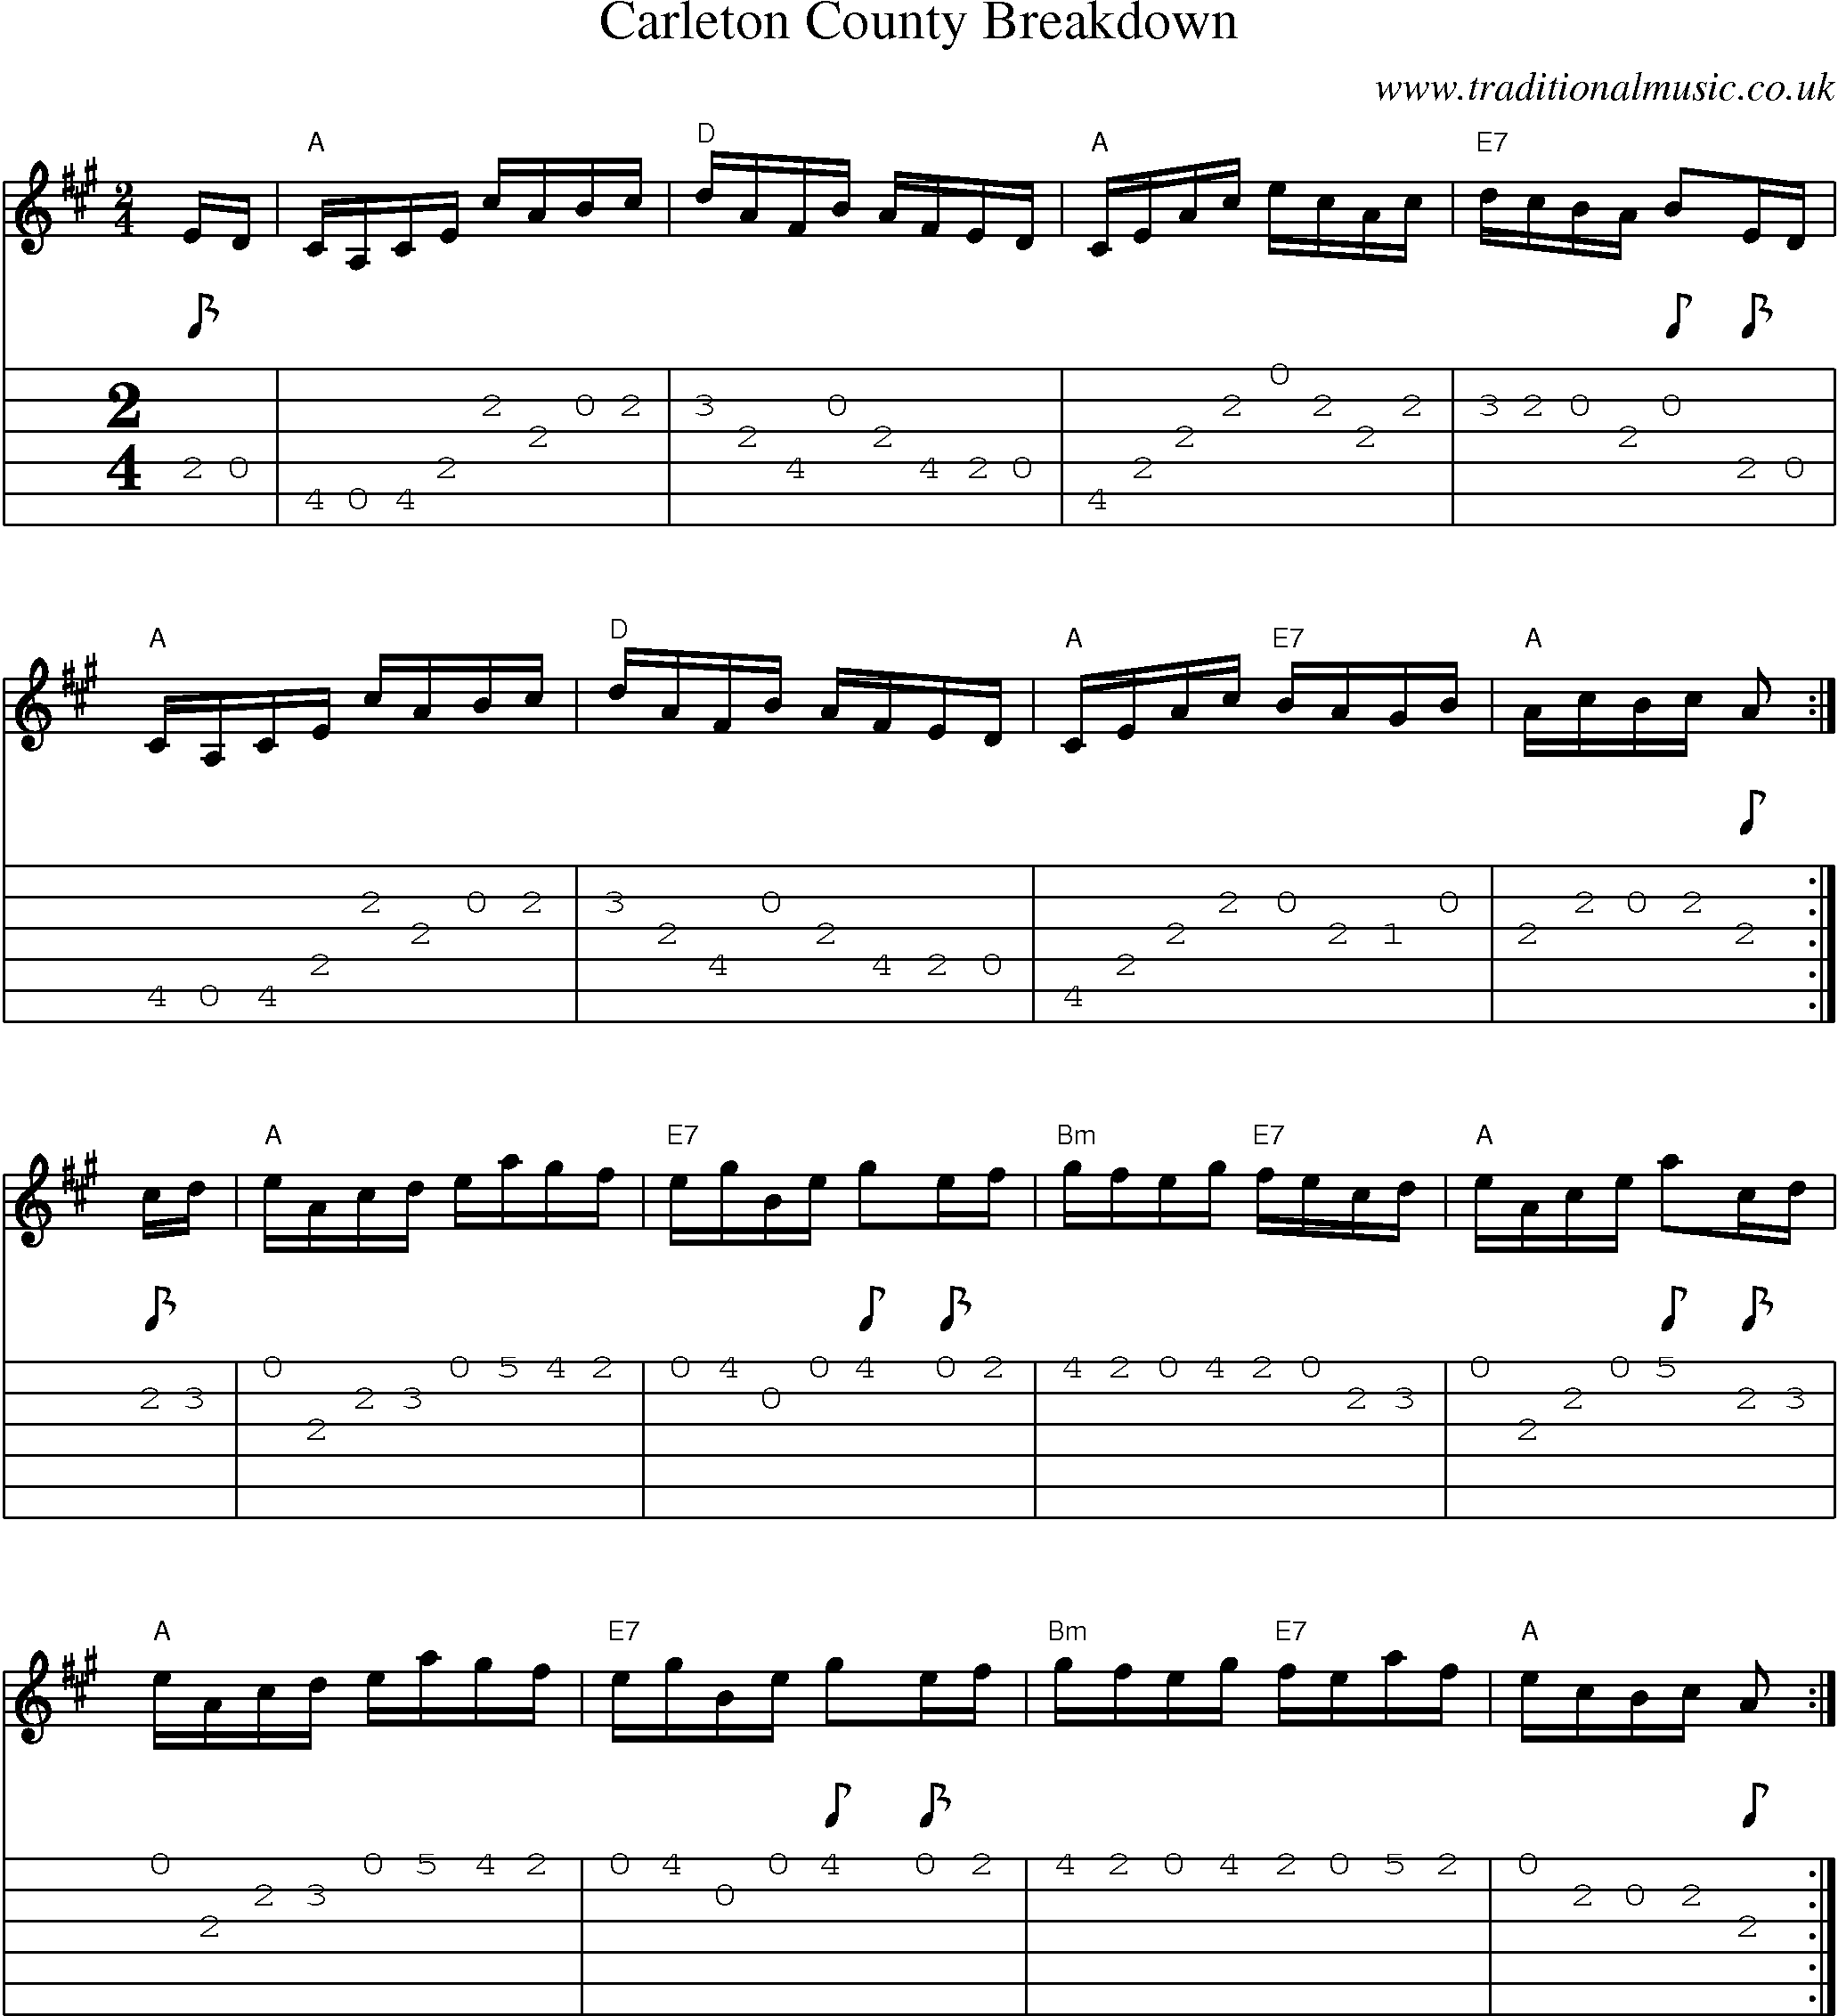 Music Score and Guitar Tabs for Carleton County Breakdown